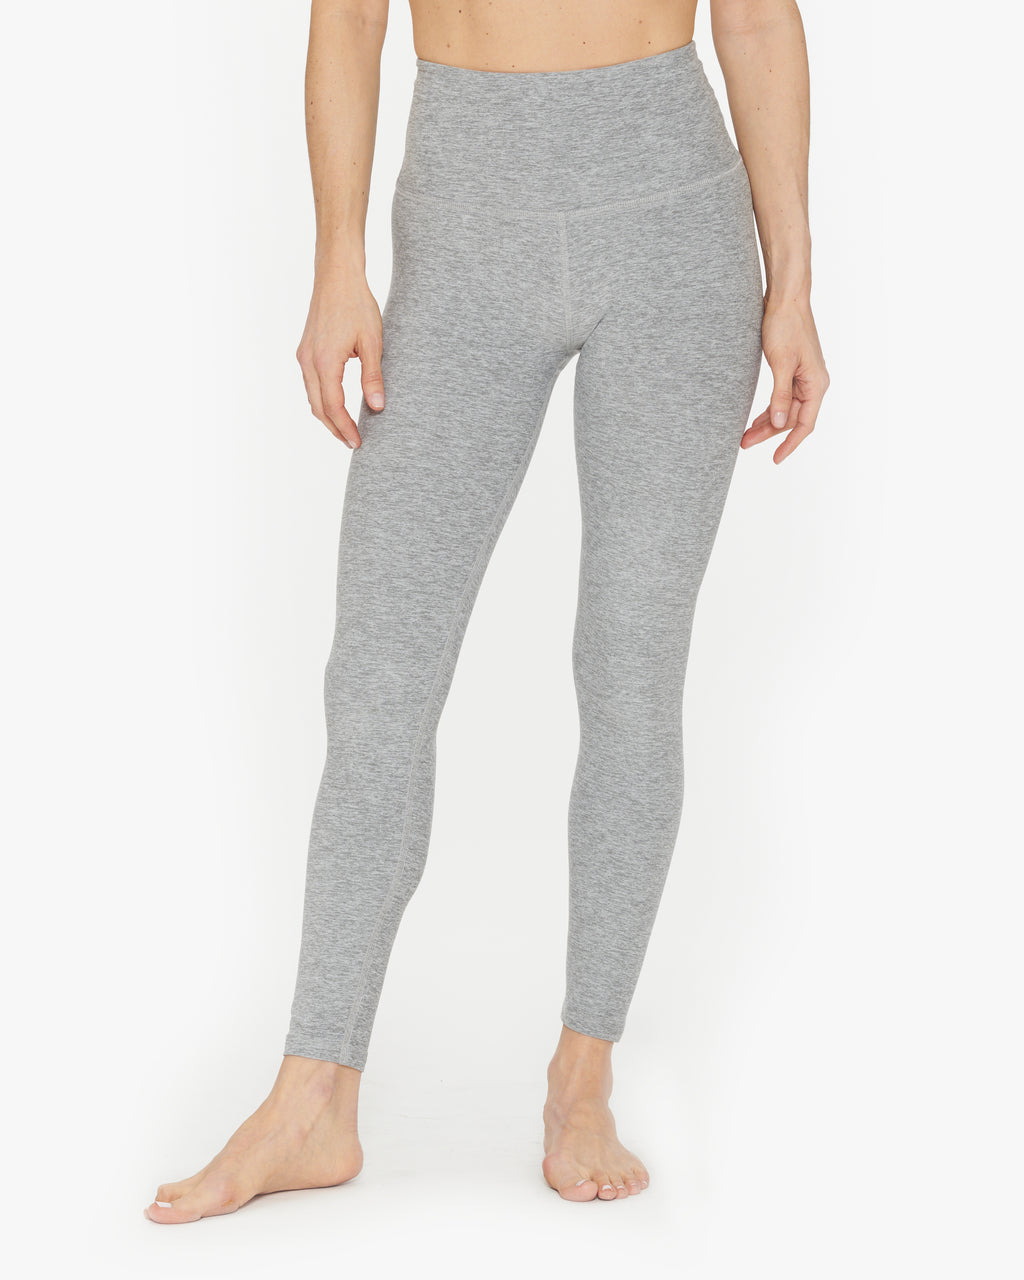 Soft Leggings: Beyond Yoga Spacedye Caught In The Midi High Waisted Legging, Don't Miss Out on These 75 Fitness Deals, All on Sale For Cyber Monday!